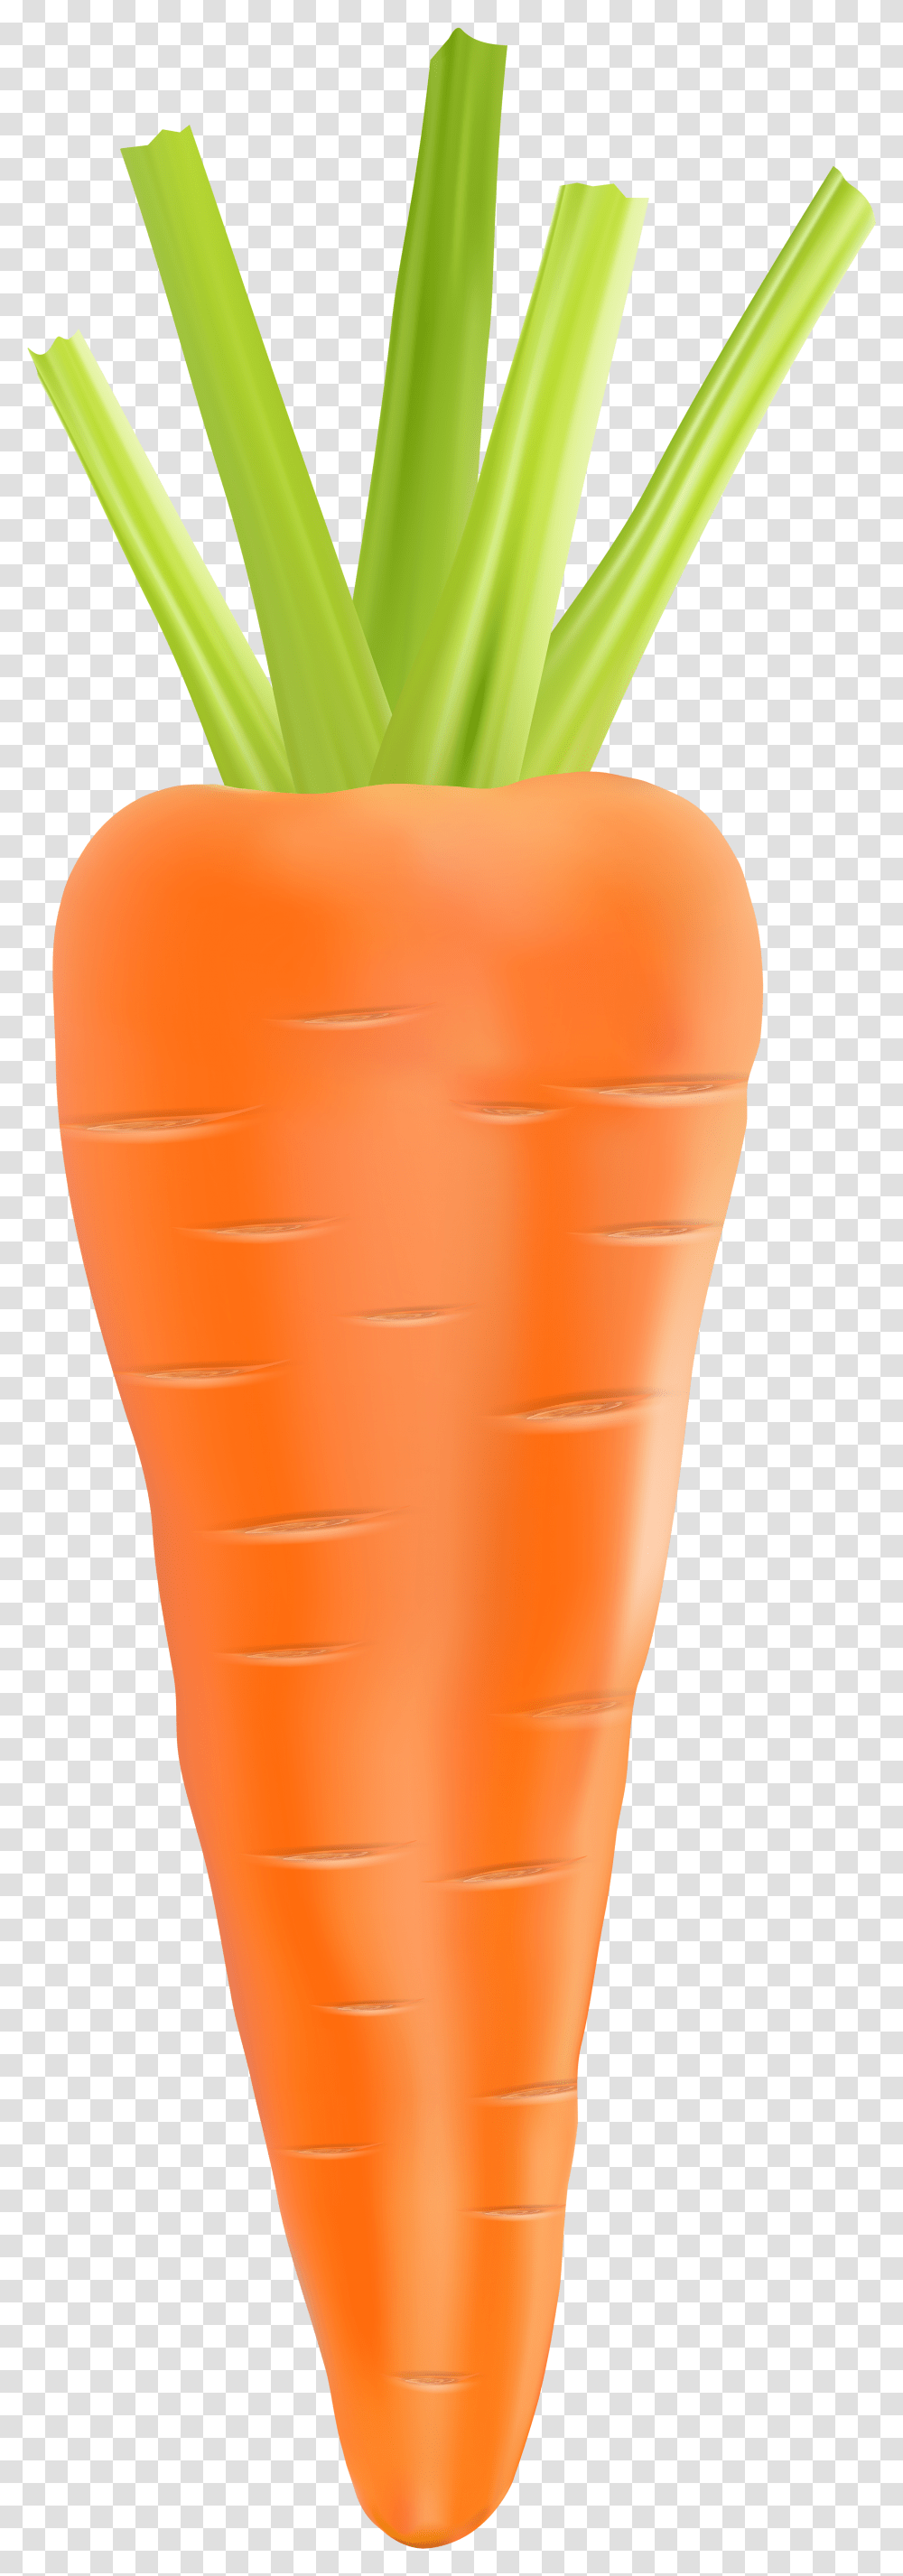 Carrot Clipart Background Carrot Transparent Png